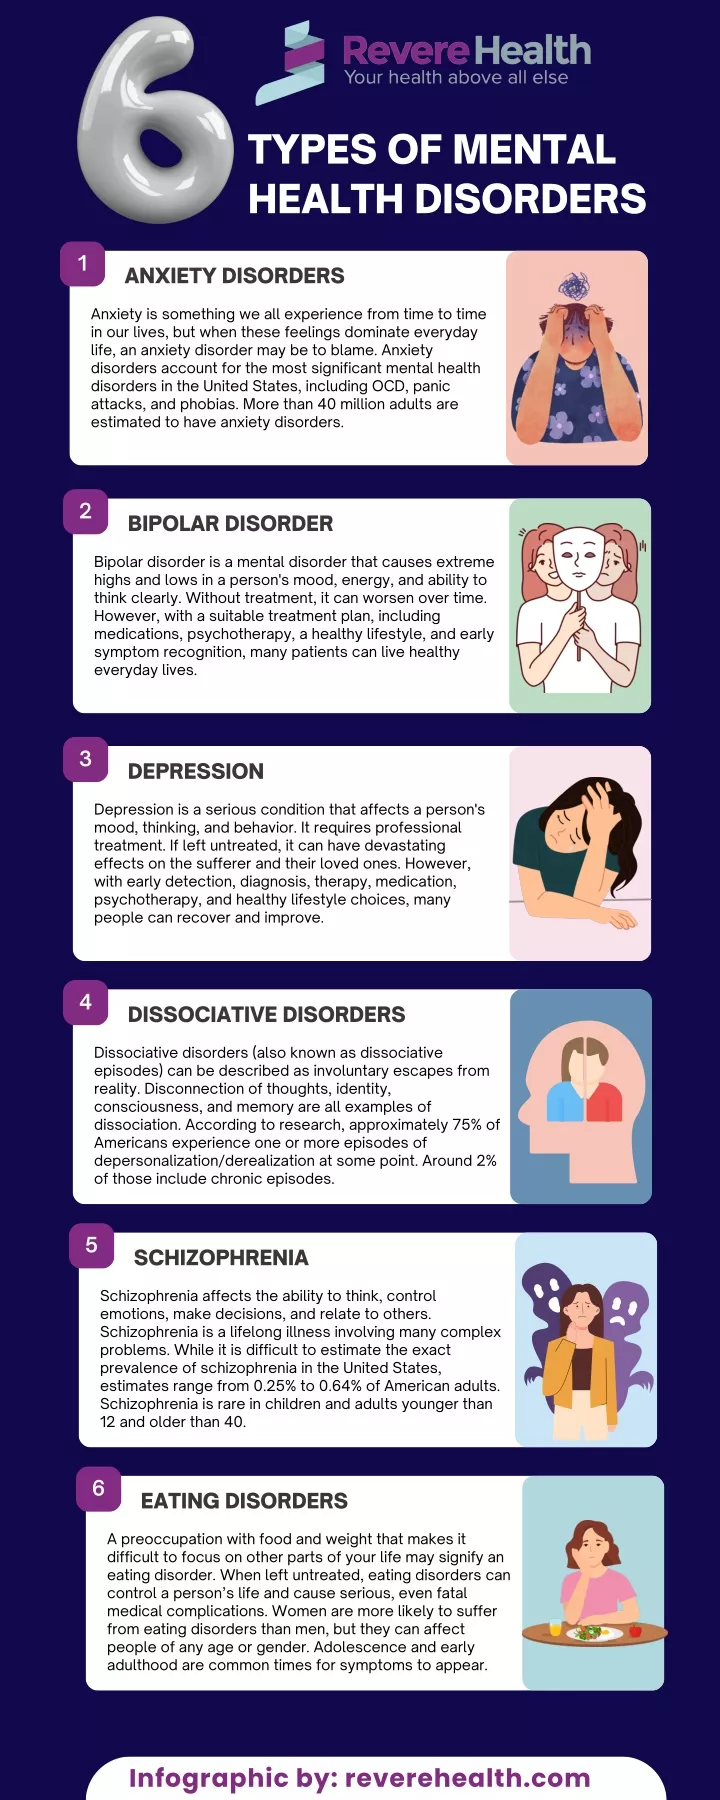 PPT - Types of Mental Health Disorders Infographic Revere Health ...